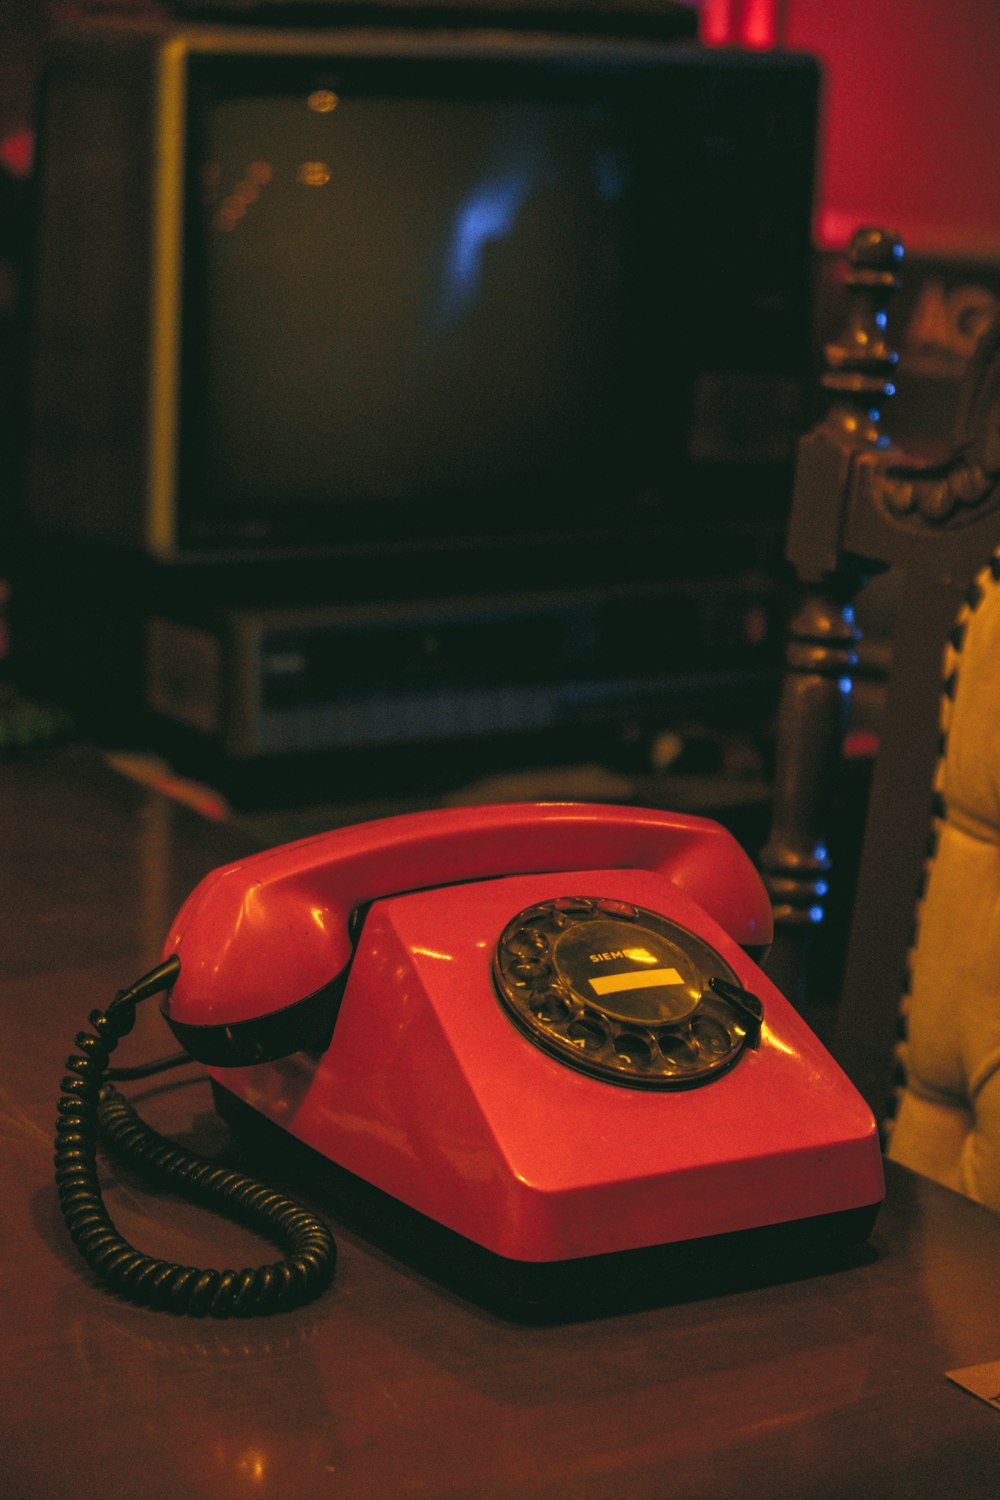 a red phone sitting on a table in front of a tv